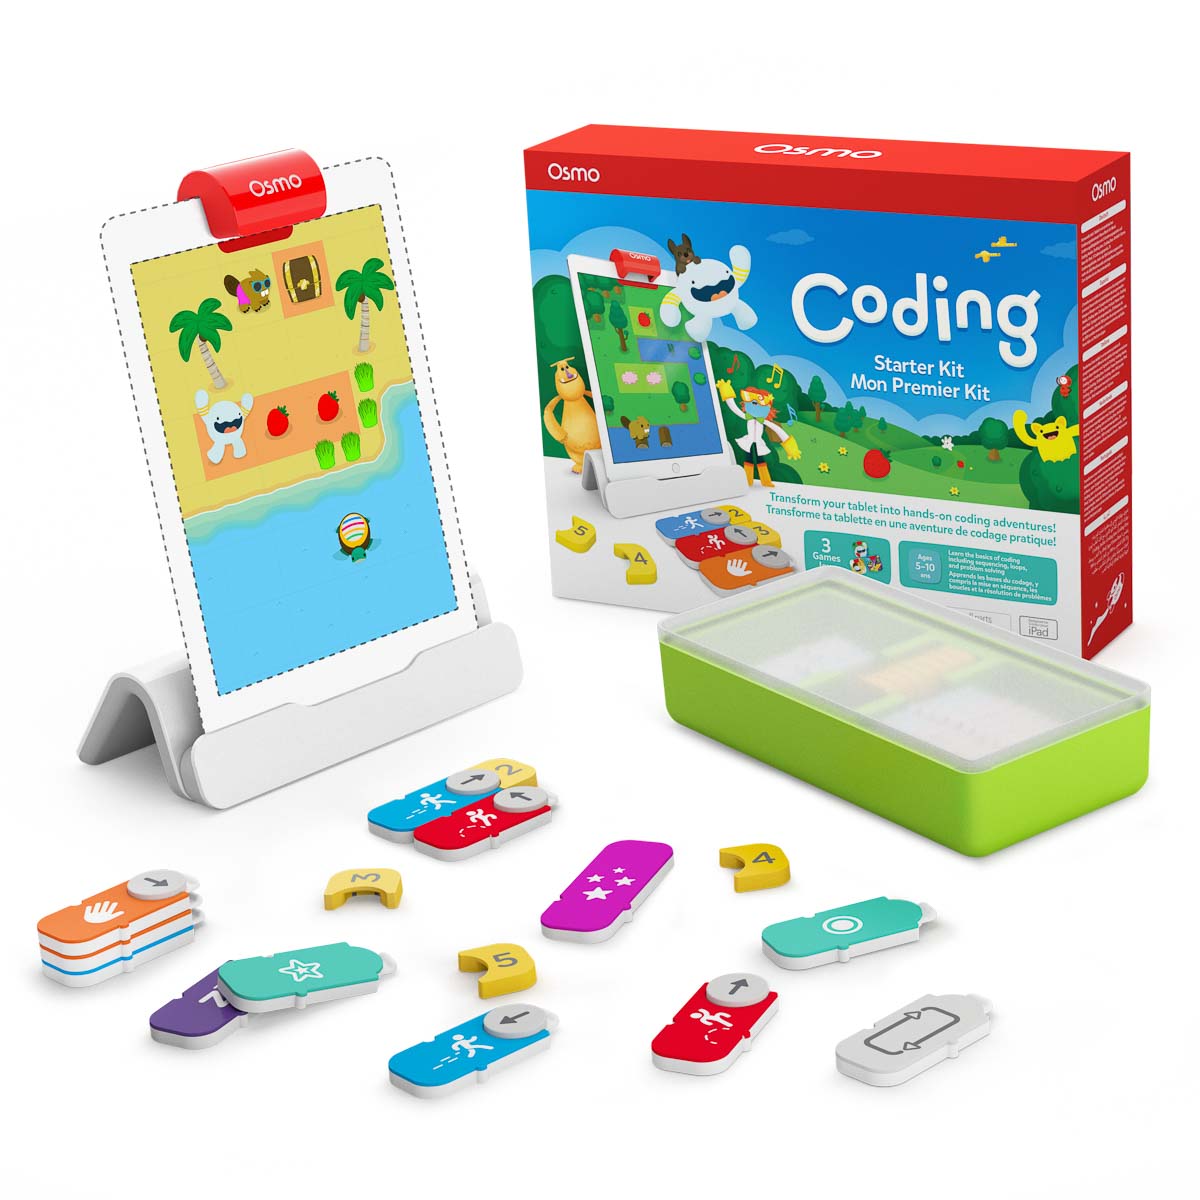 Featured image for “PLATZ 3: Osmo Coding Starter Kit (Version2021) (Tangible Play)”